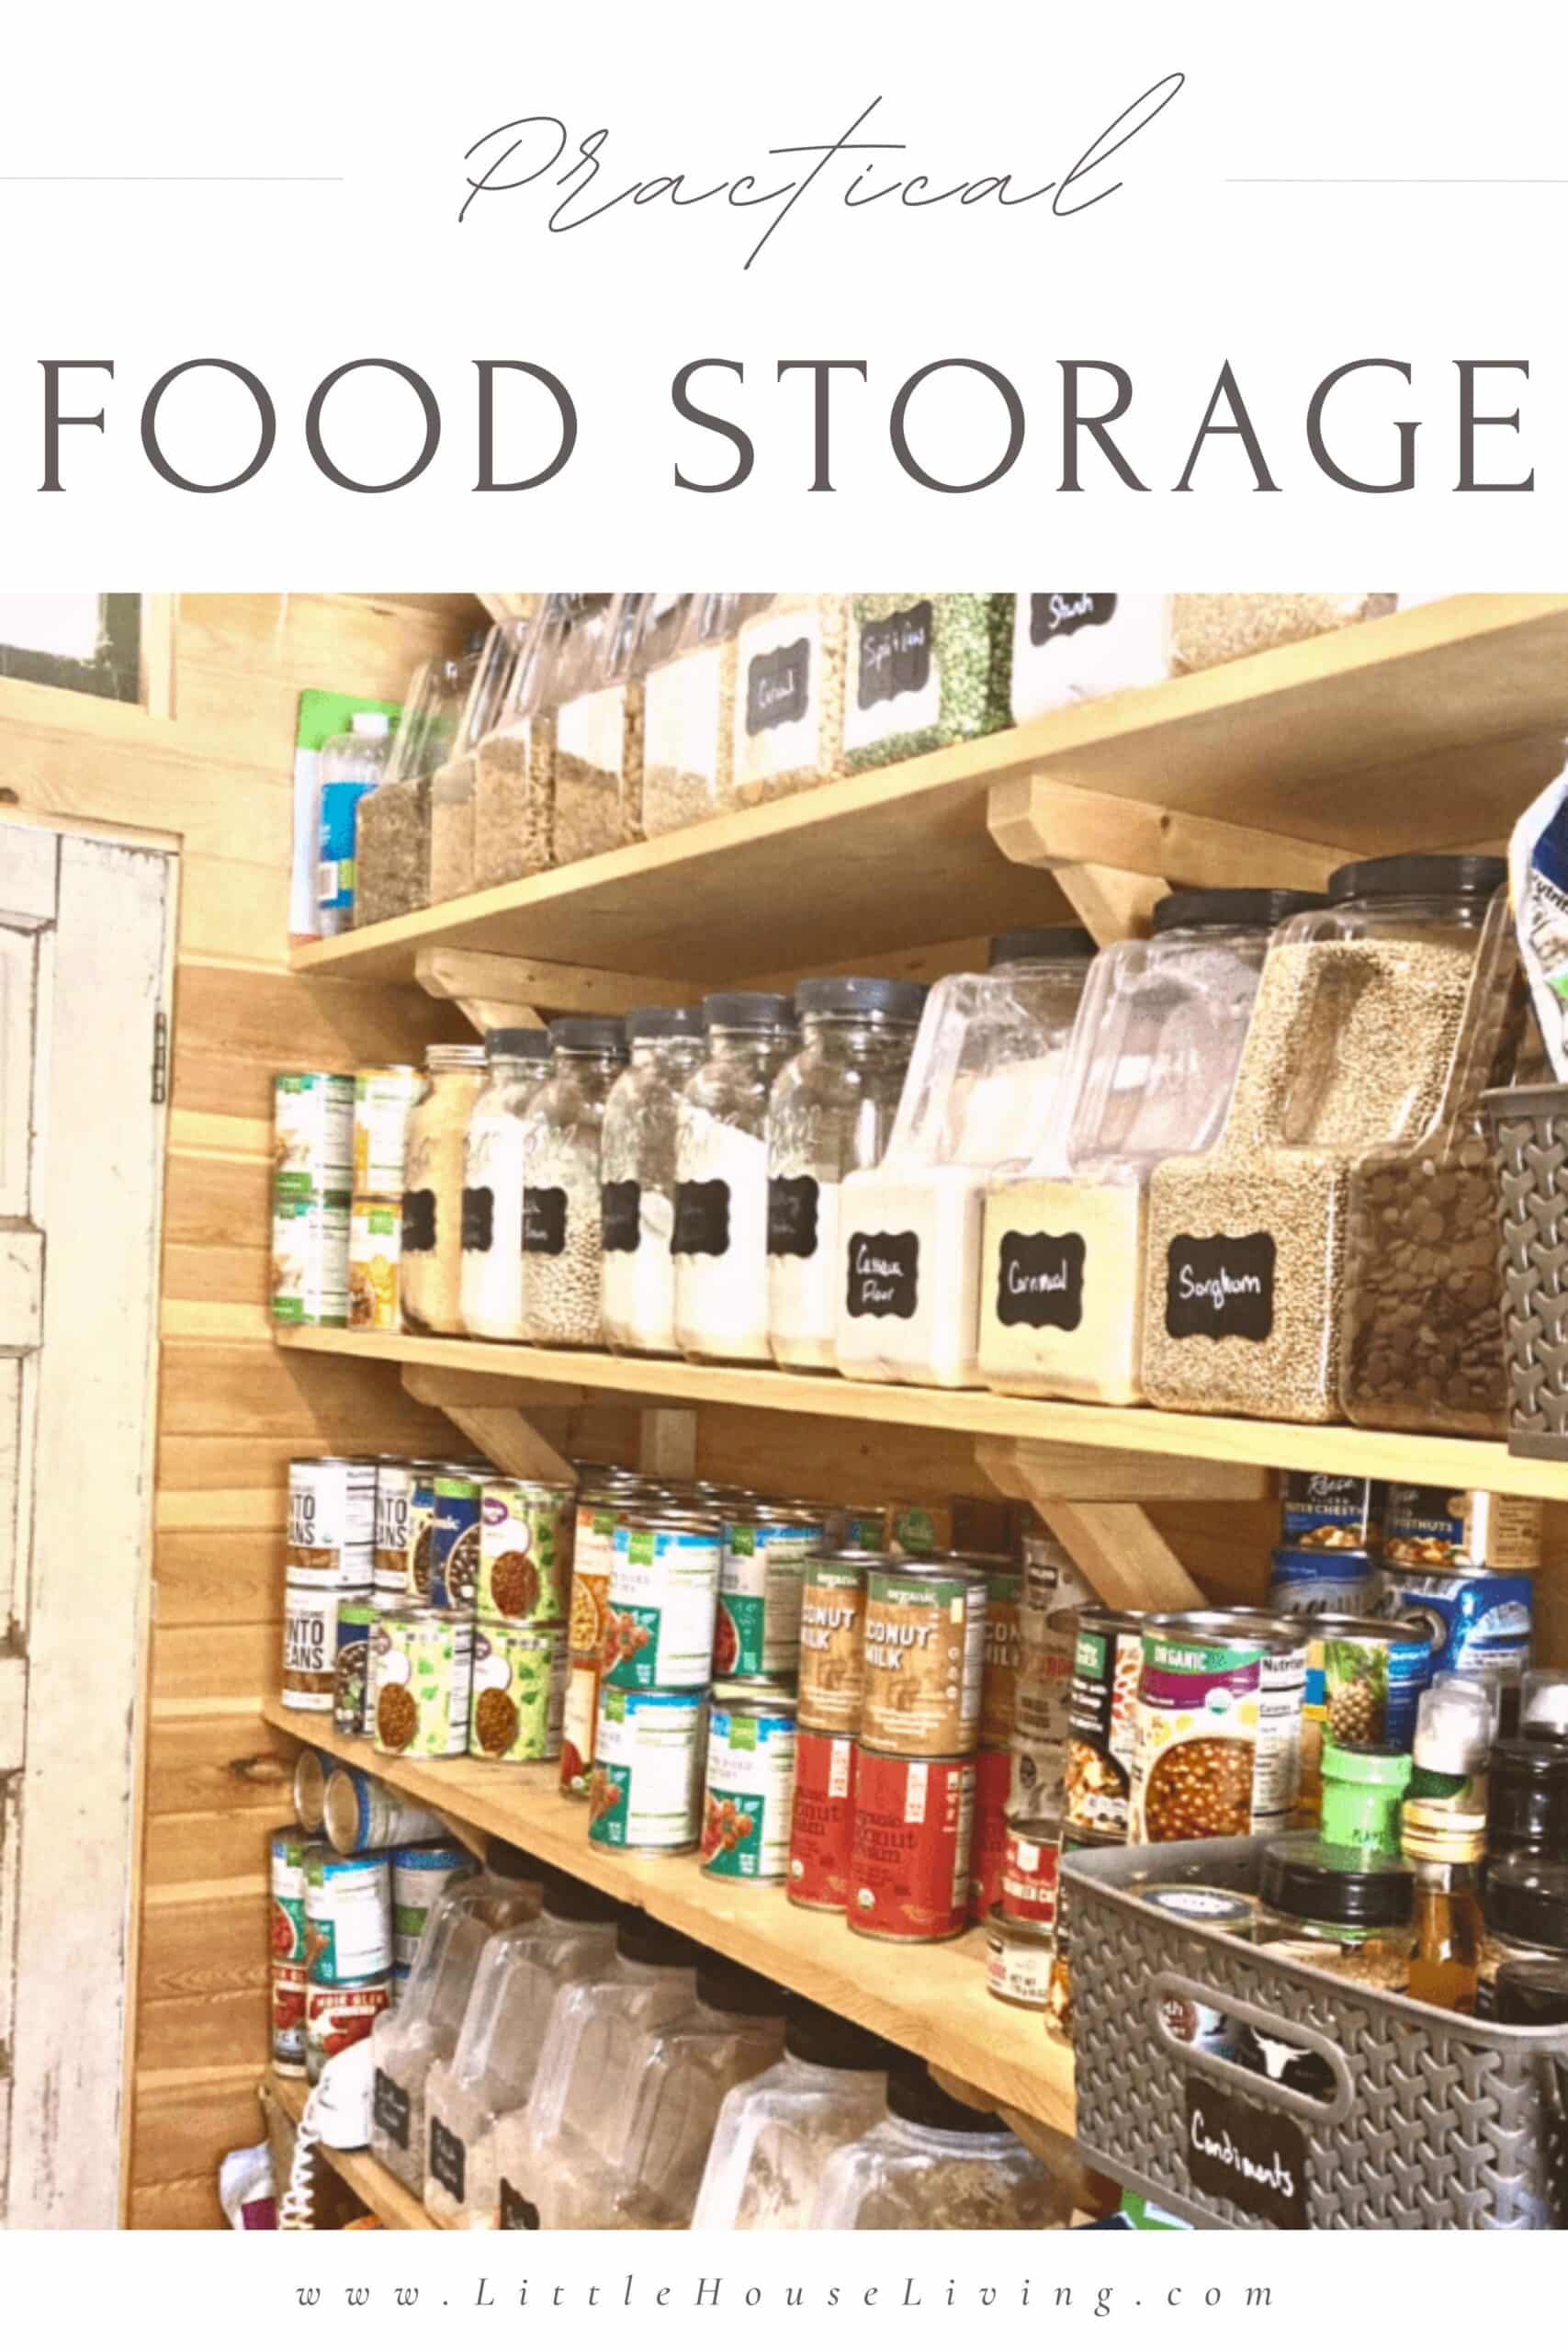 Are you concerned about rising food prices and unsure how to prepare? Here's a guide to Practical Food Storage to prepare for price increases!